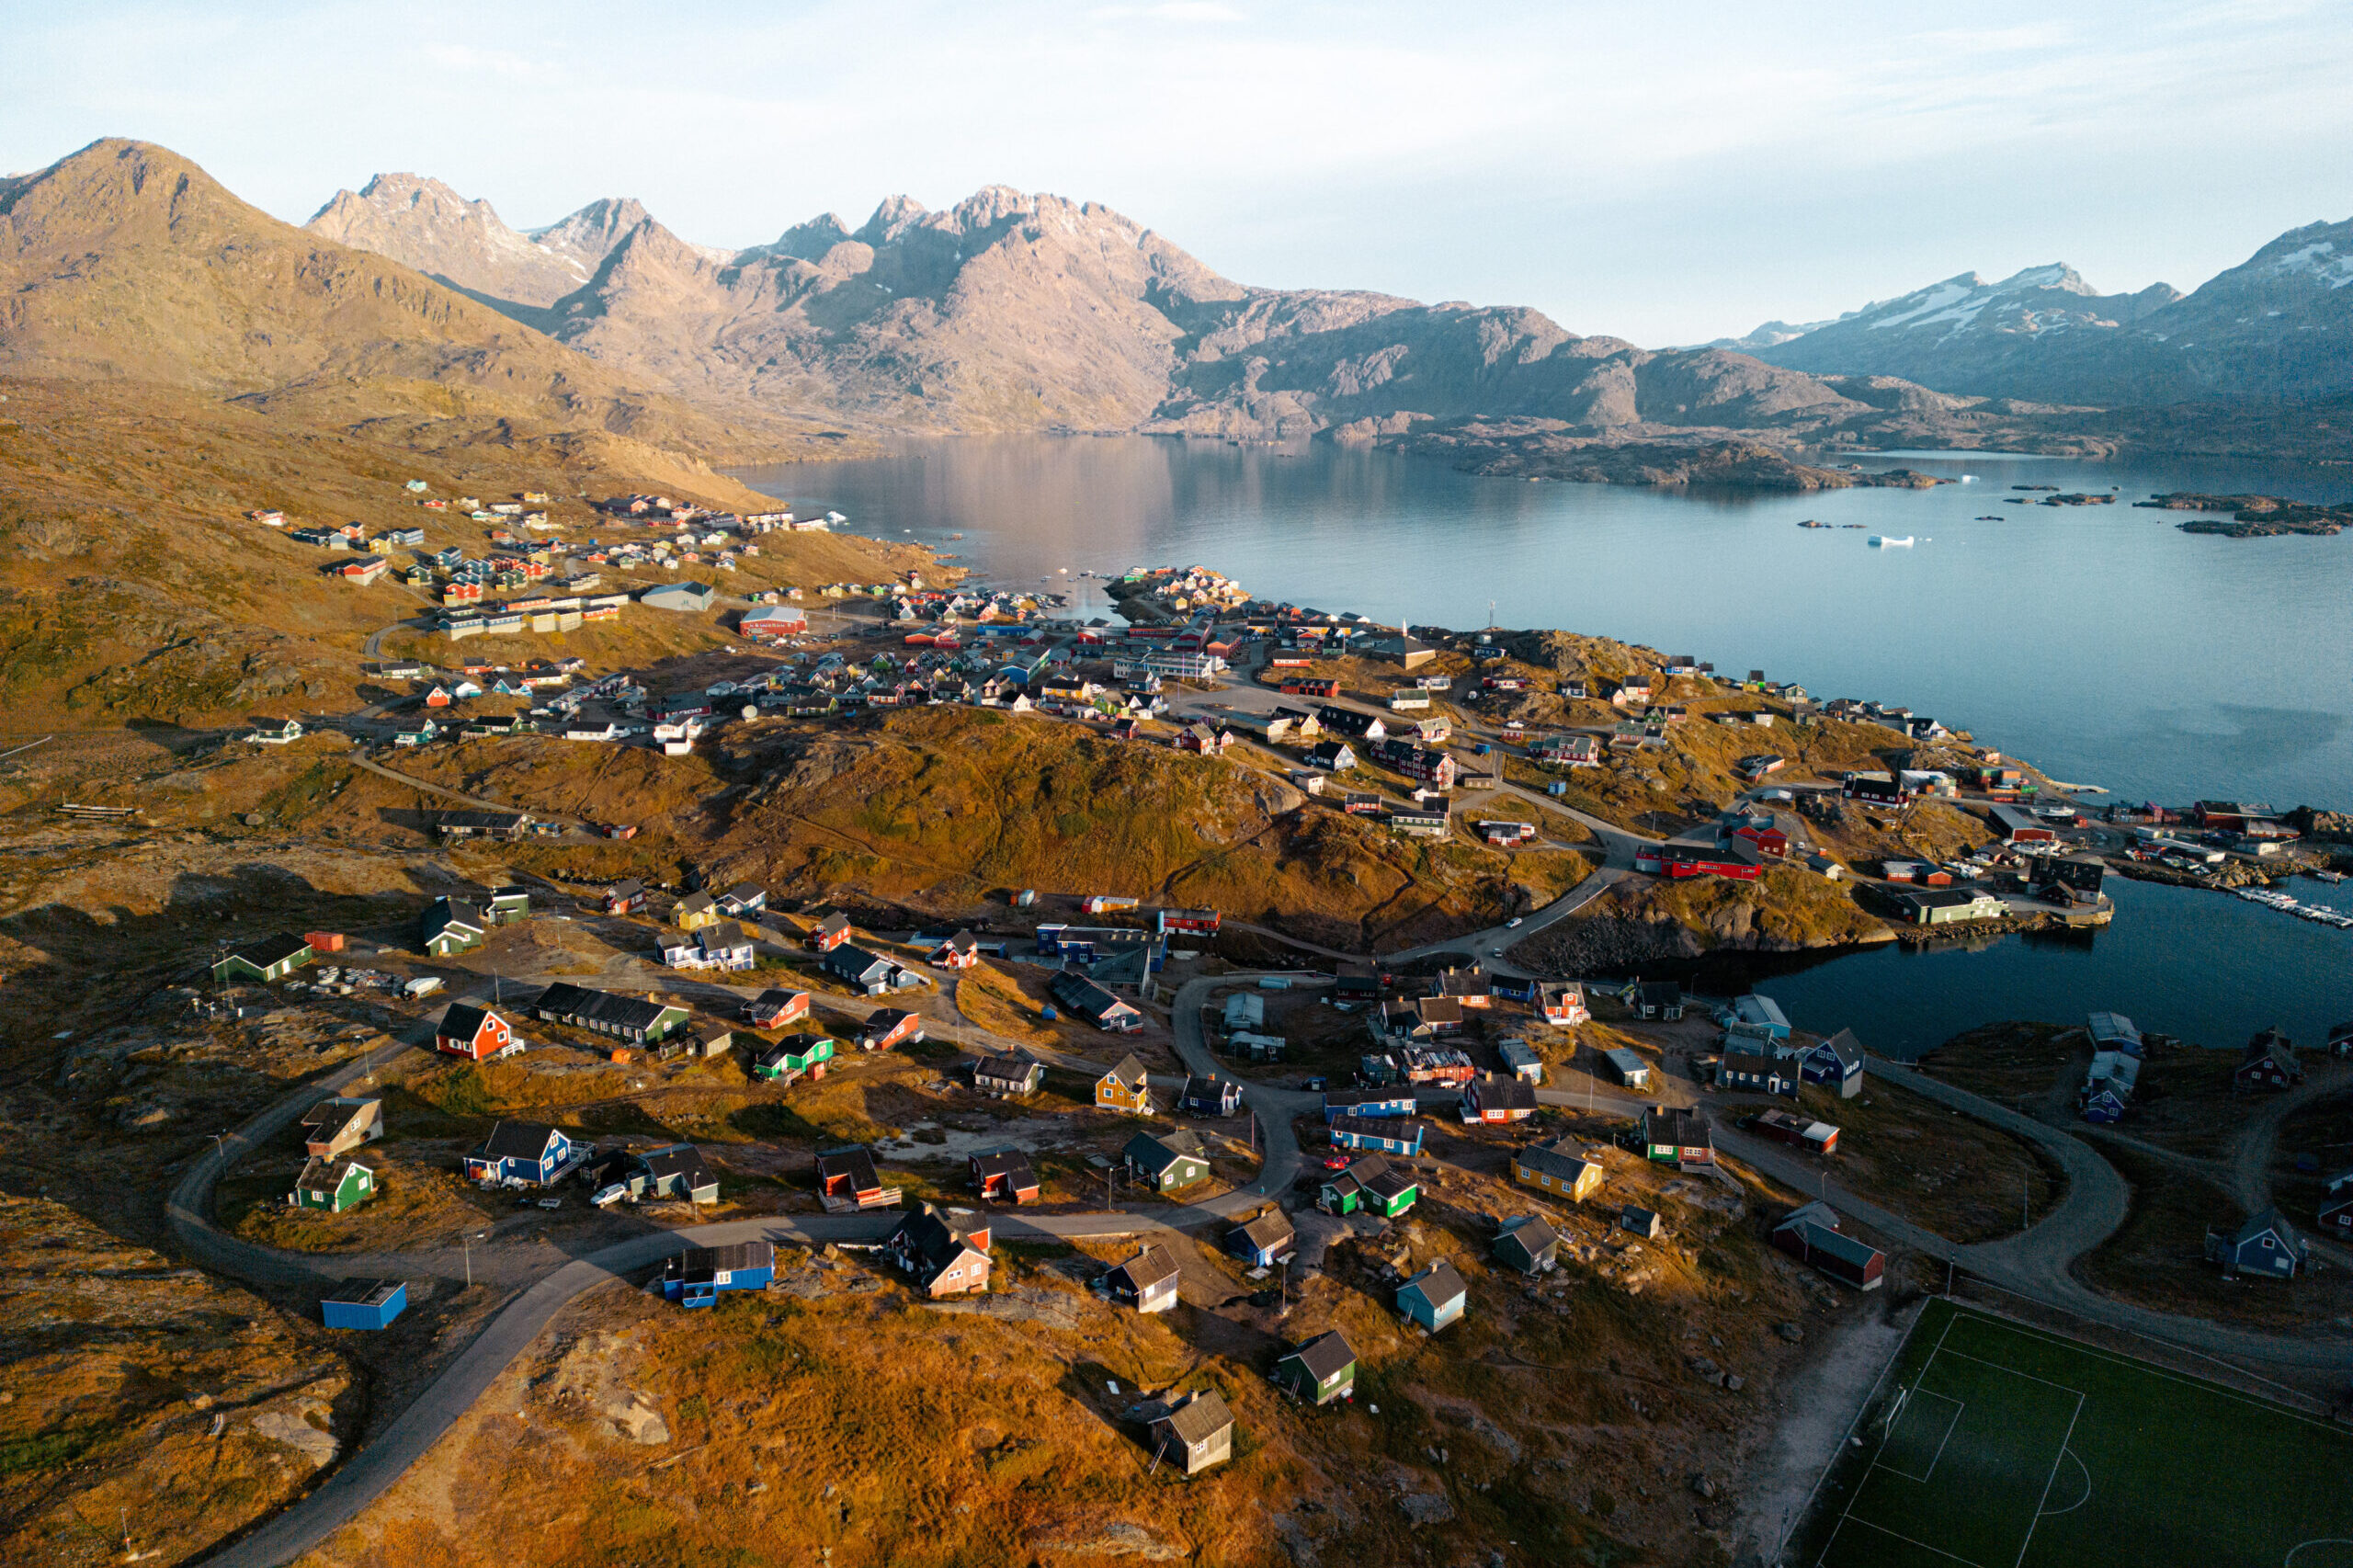 View over Tasiilaq towards the end of the fjord. Photo by Chris Koenig - Visit Greenland